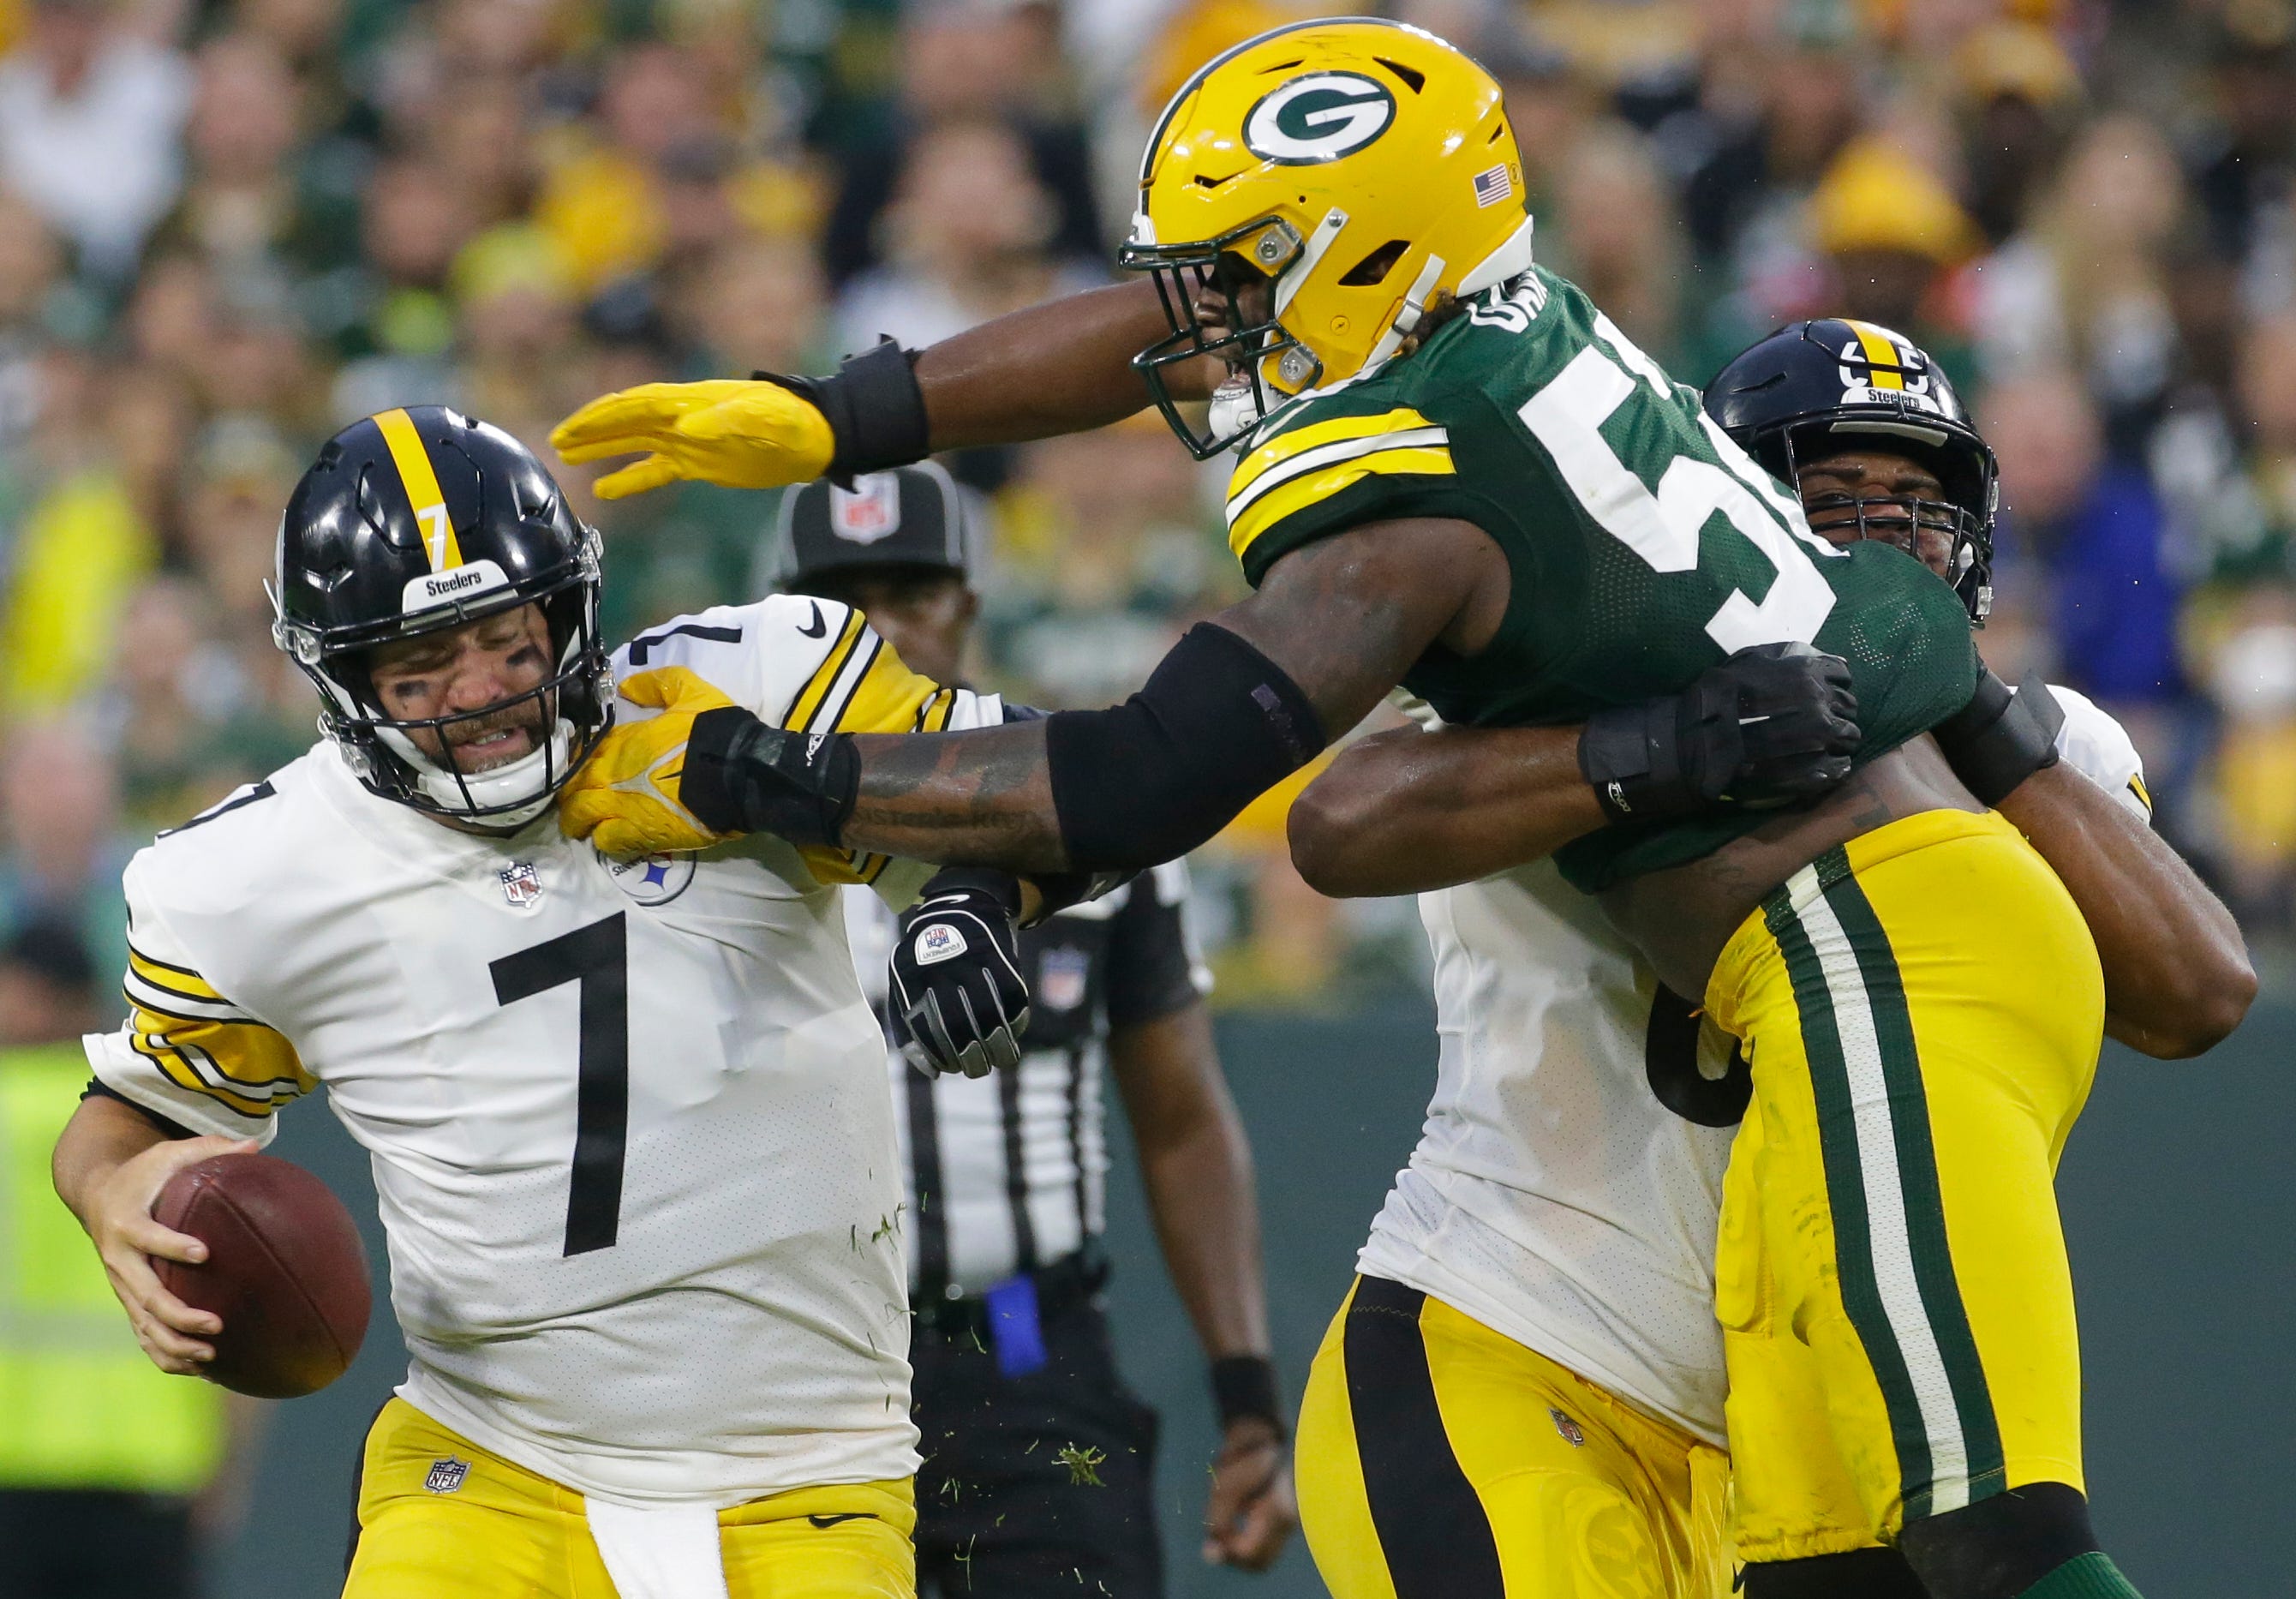 Green Bay Packers linebacker Rashan Gary (52) sacks Pittsburgh Steelers quarterback Ben Roethlisberger (7) during the fourth quarter of their game Sunday, October 3, 2021 at Lambeau Field in Green Bay, Wis. Green Bay Packers beat the Pittsburgh Steelers 27-17.